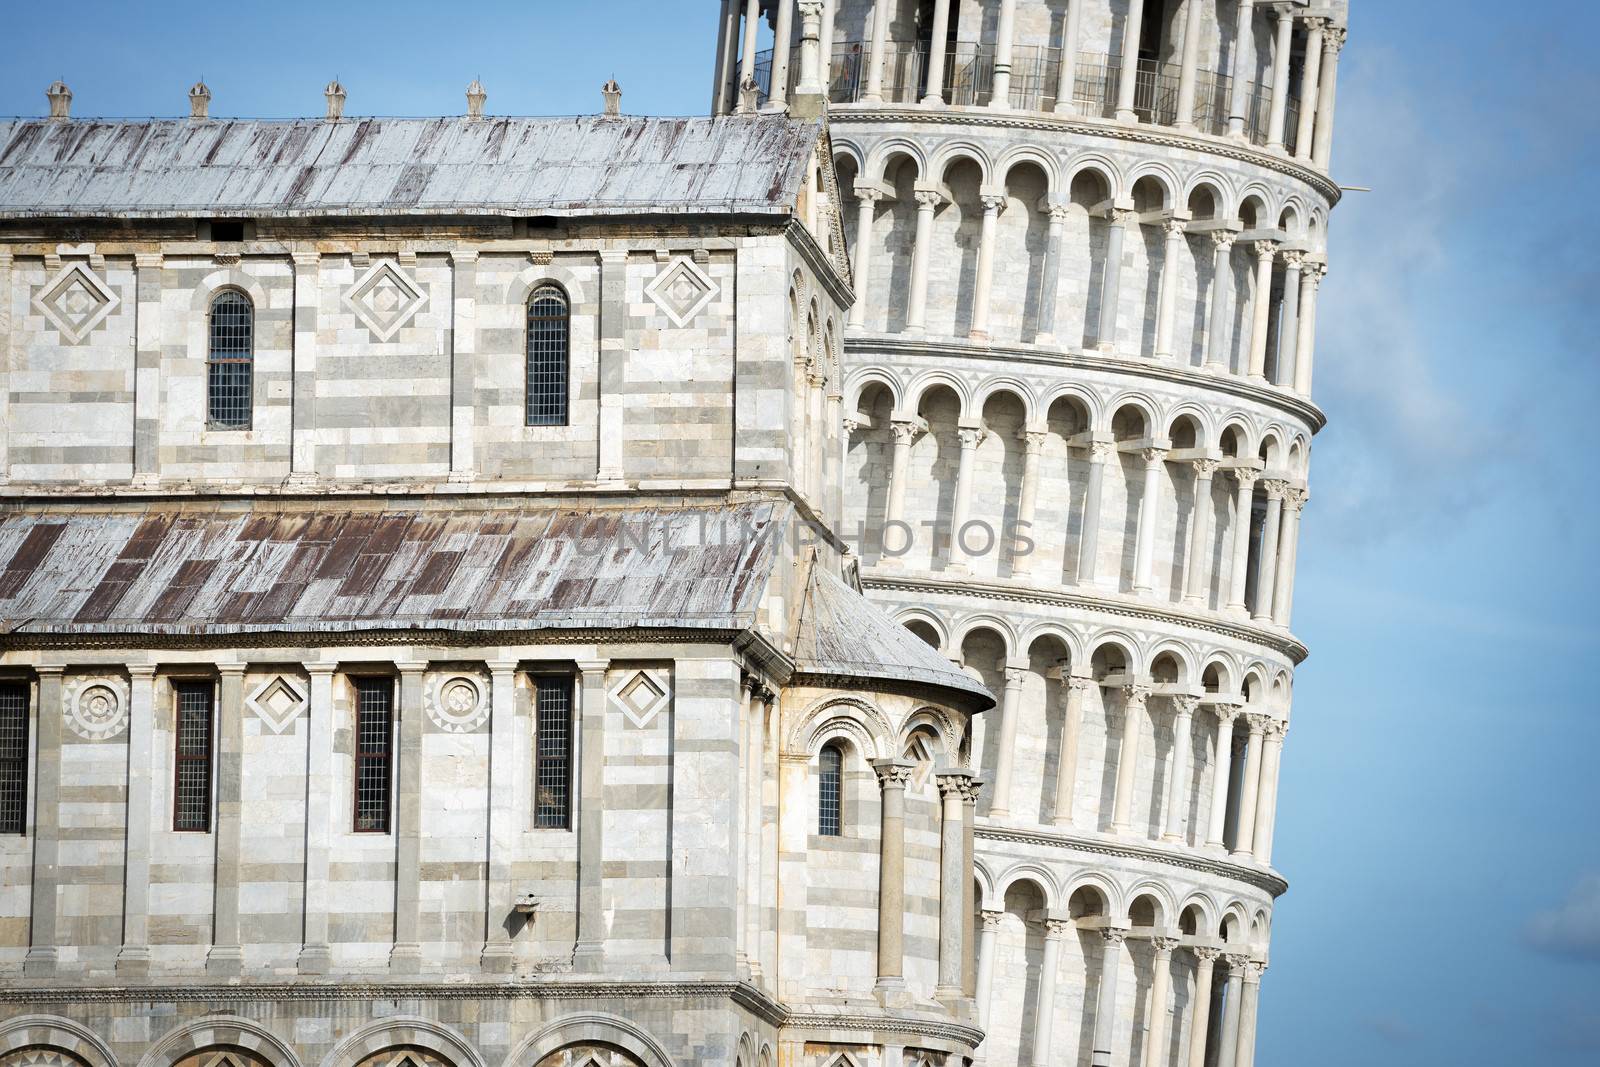 Closeup picture of the Leaning Tower in Pisa, Italy